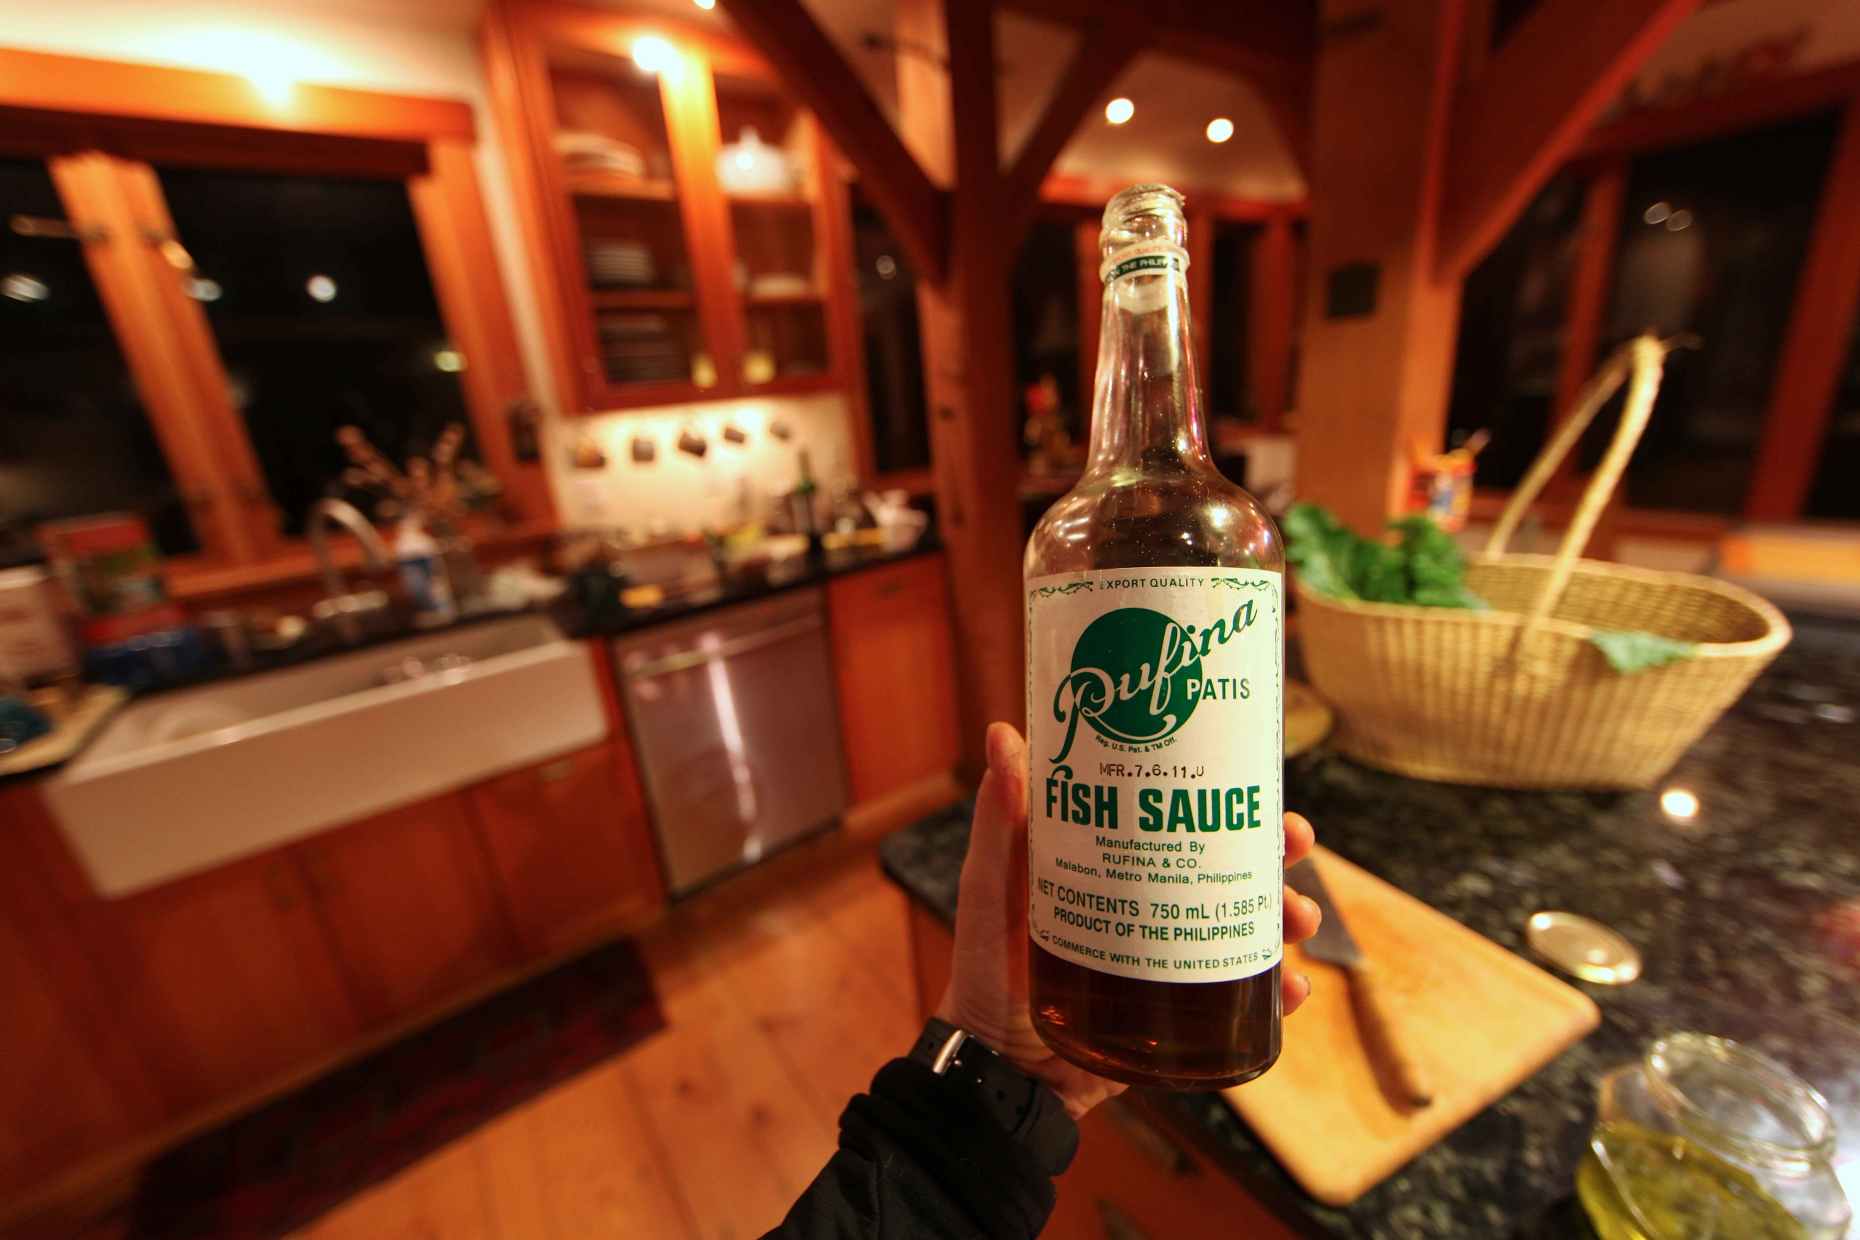 No Need For Anchovies! Get Fish Sauce in a Glass Jar. Photo © Liesl Clark